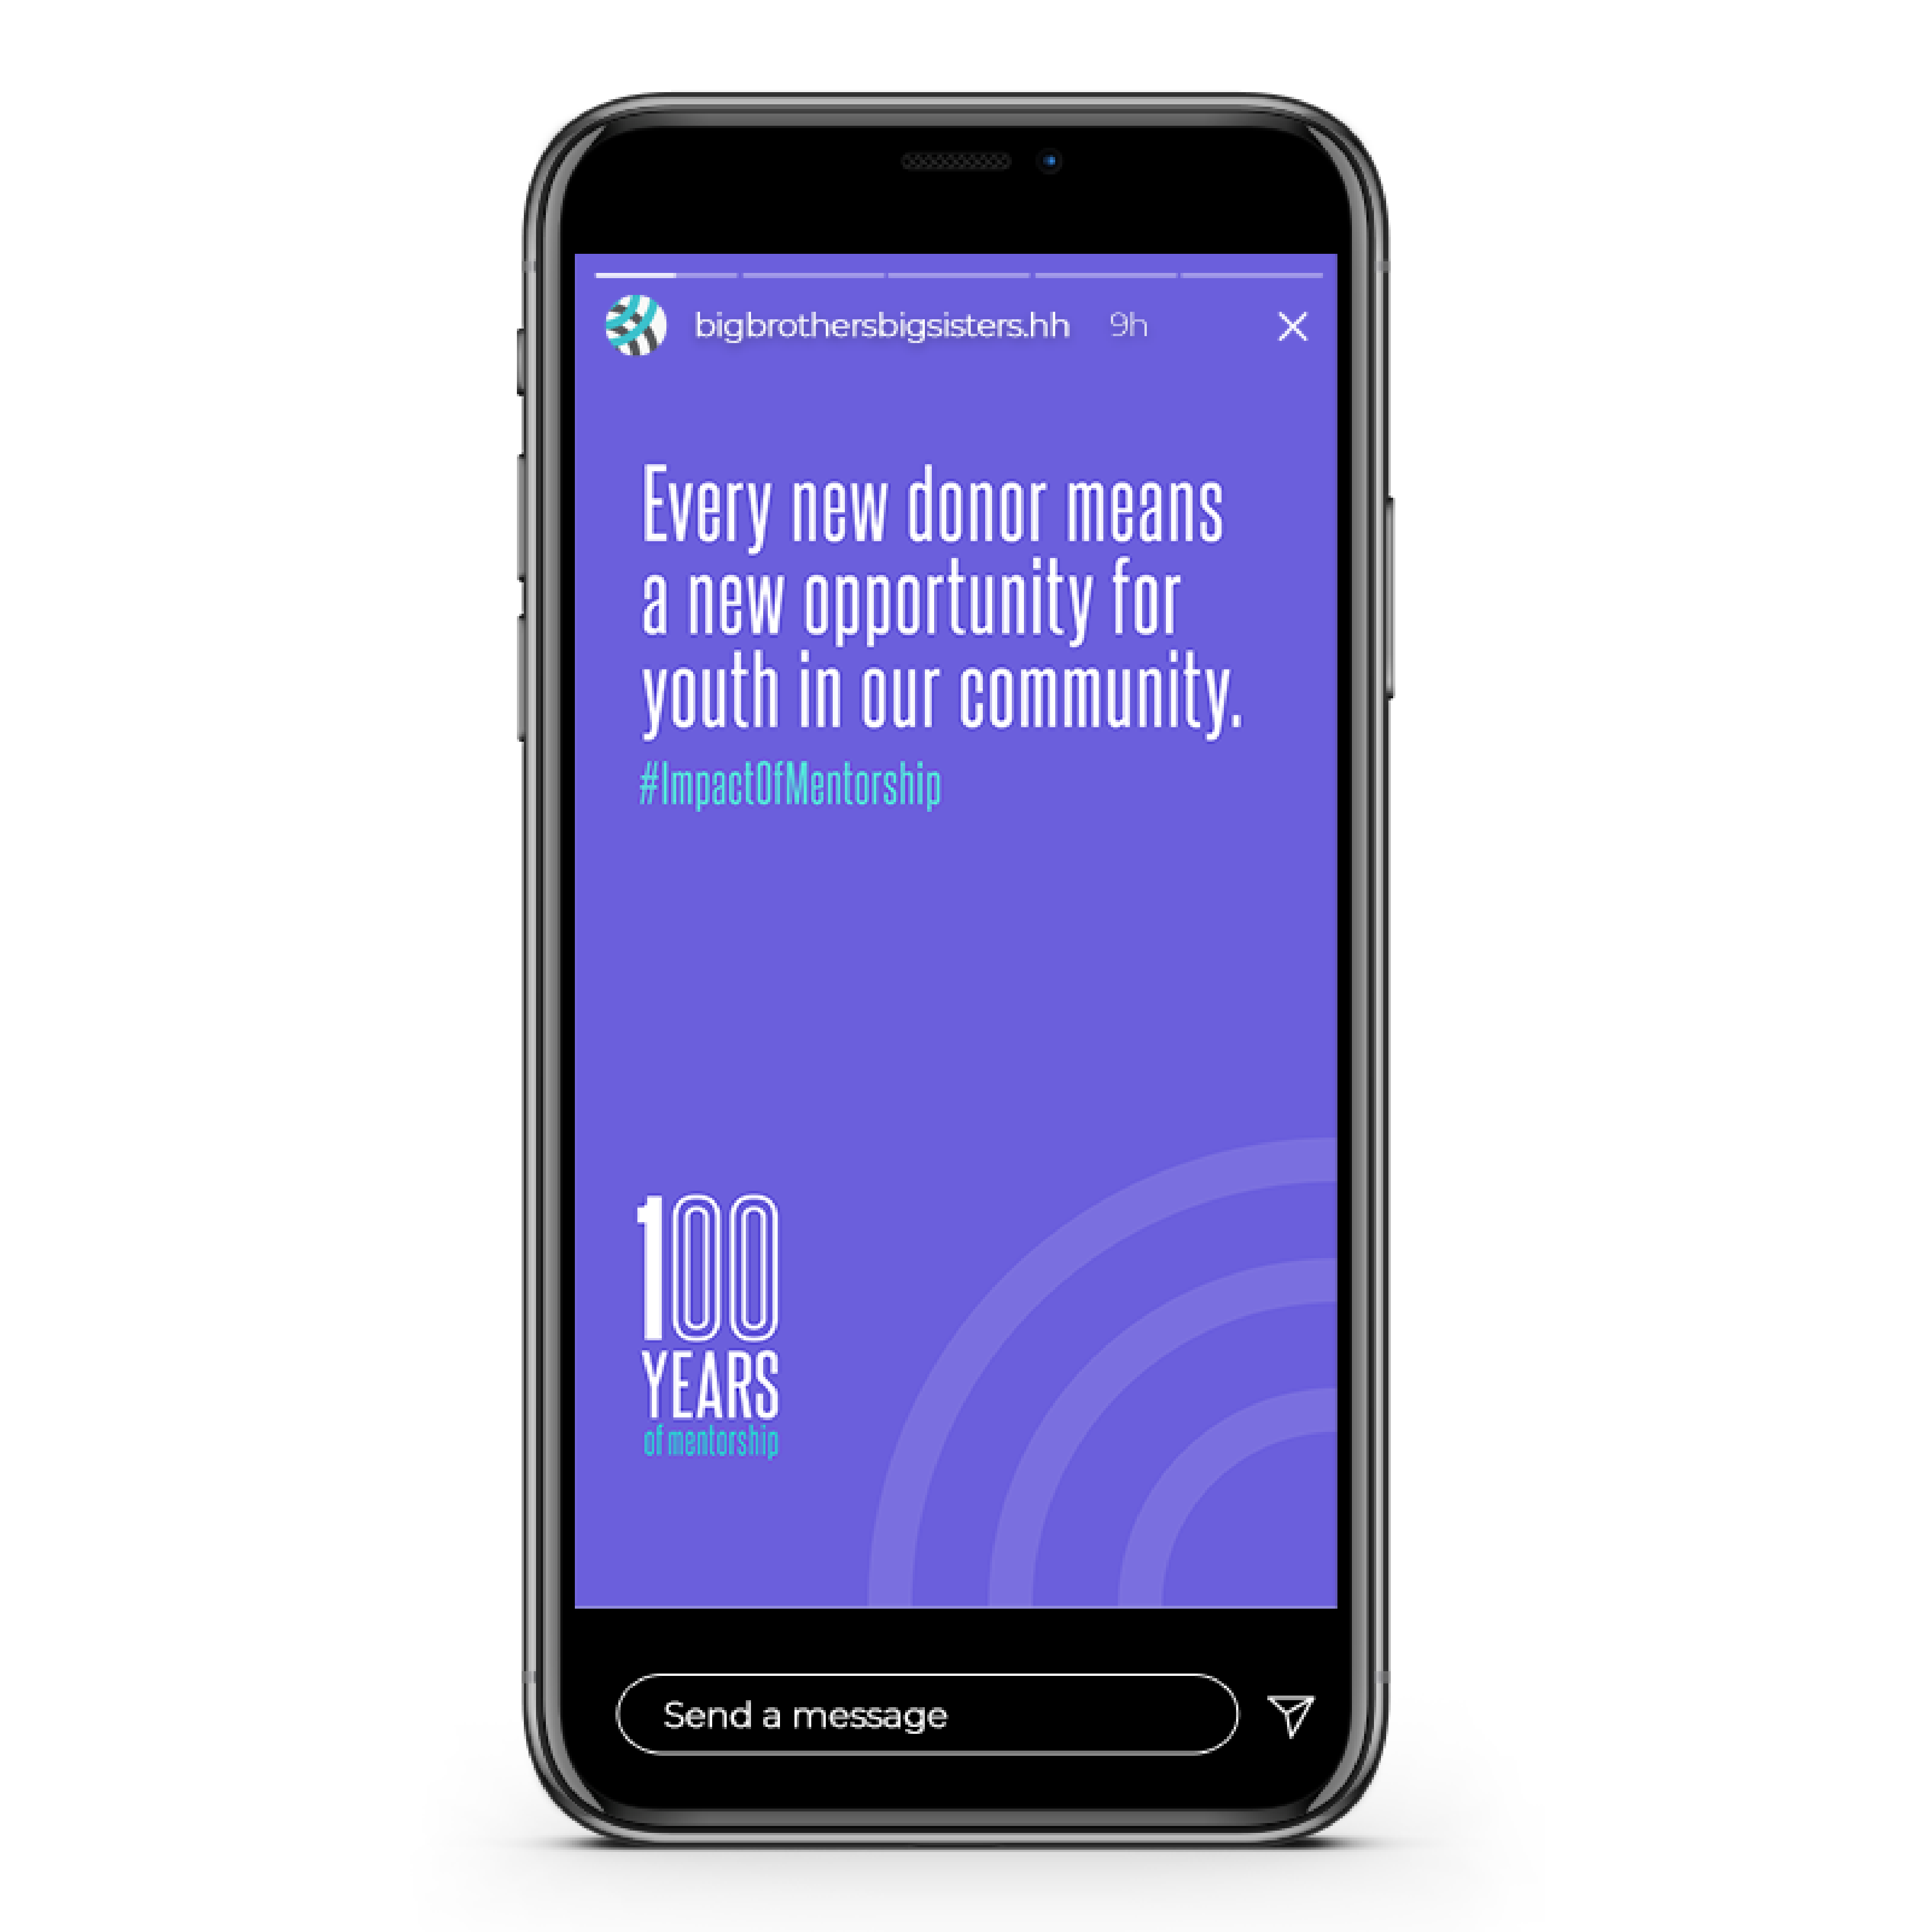 Instagram story example for the 100 Years of mentorship campaign. Text reads Every new donor means a new opportunity for youth in our community on a purple background.